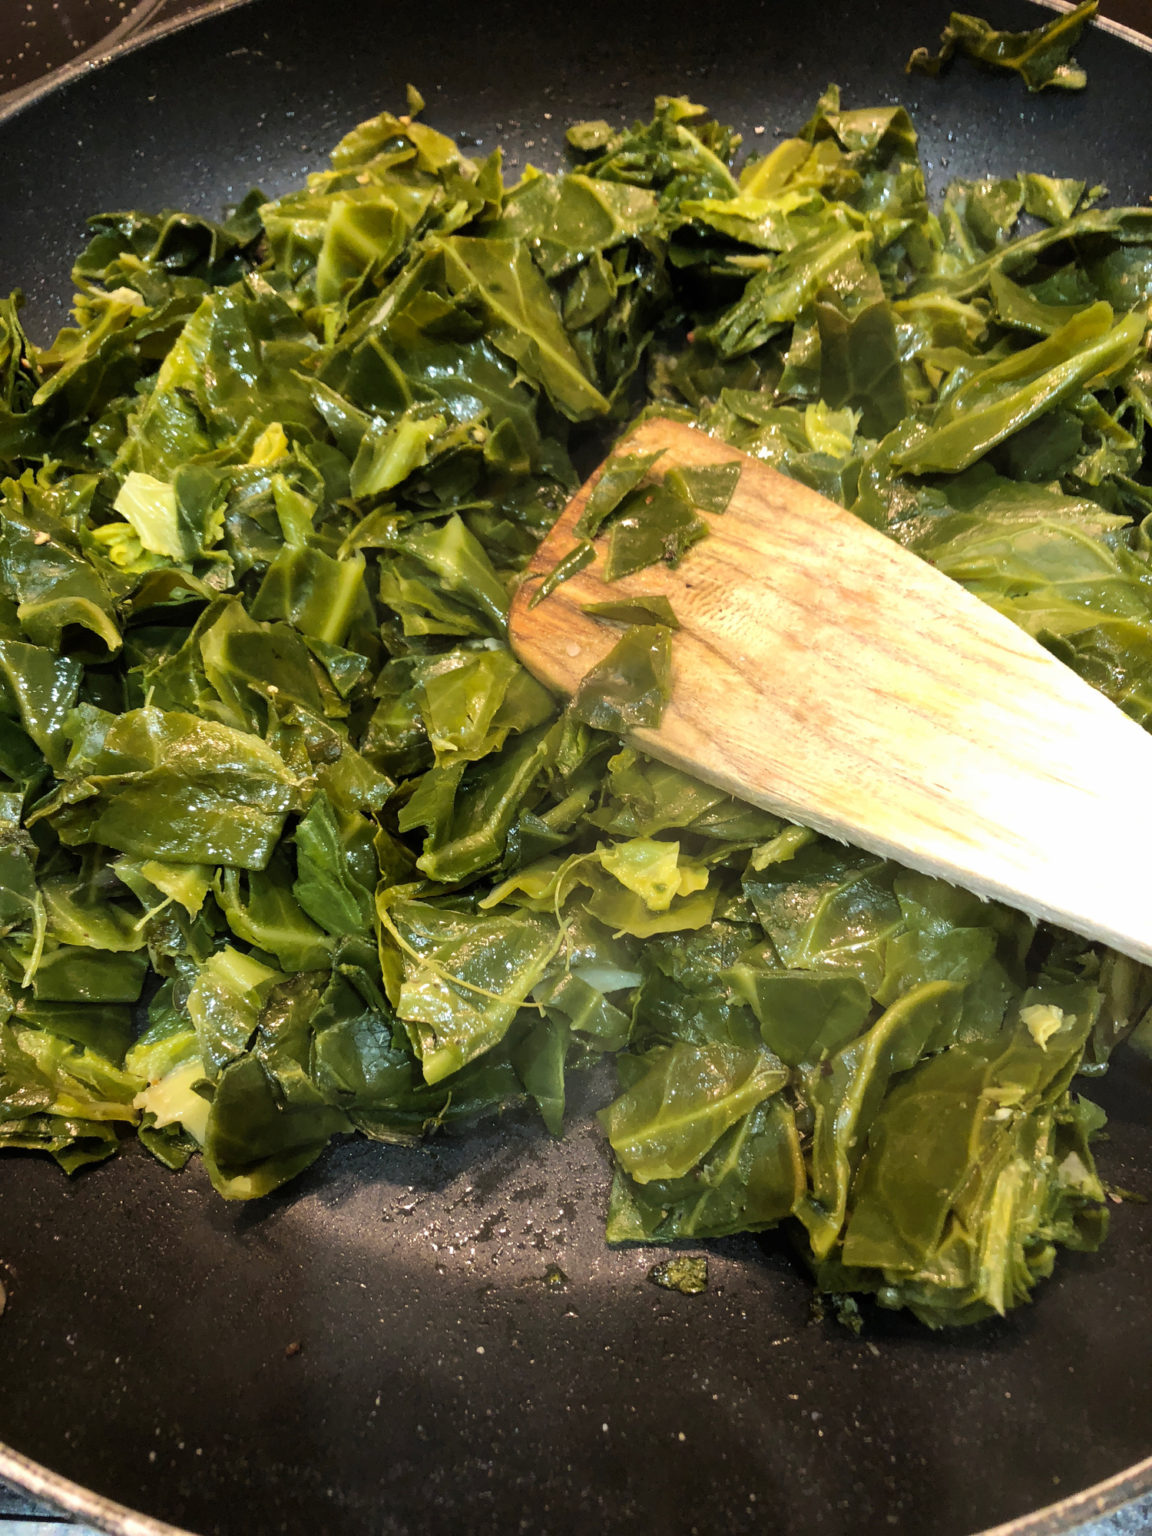 5 Good Reasons To Eat Bitter Leafy Greens Every Day - BlackDoctor.org ...